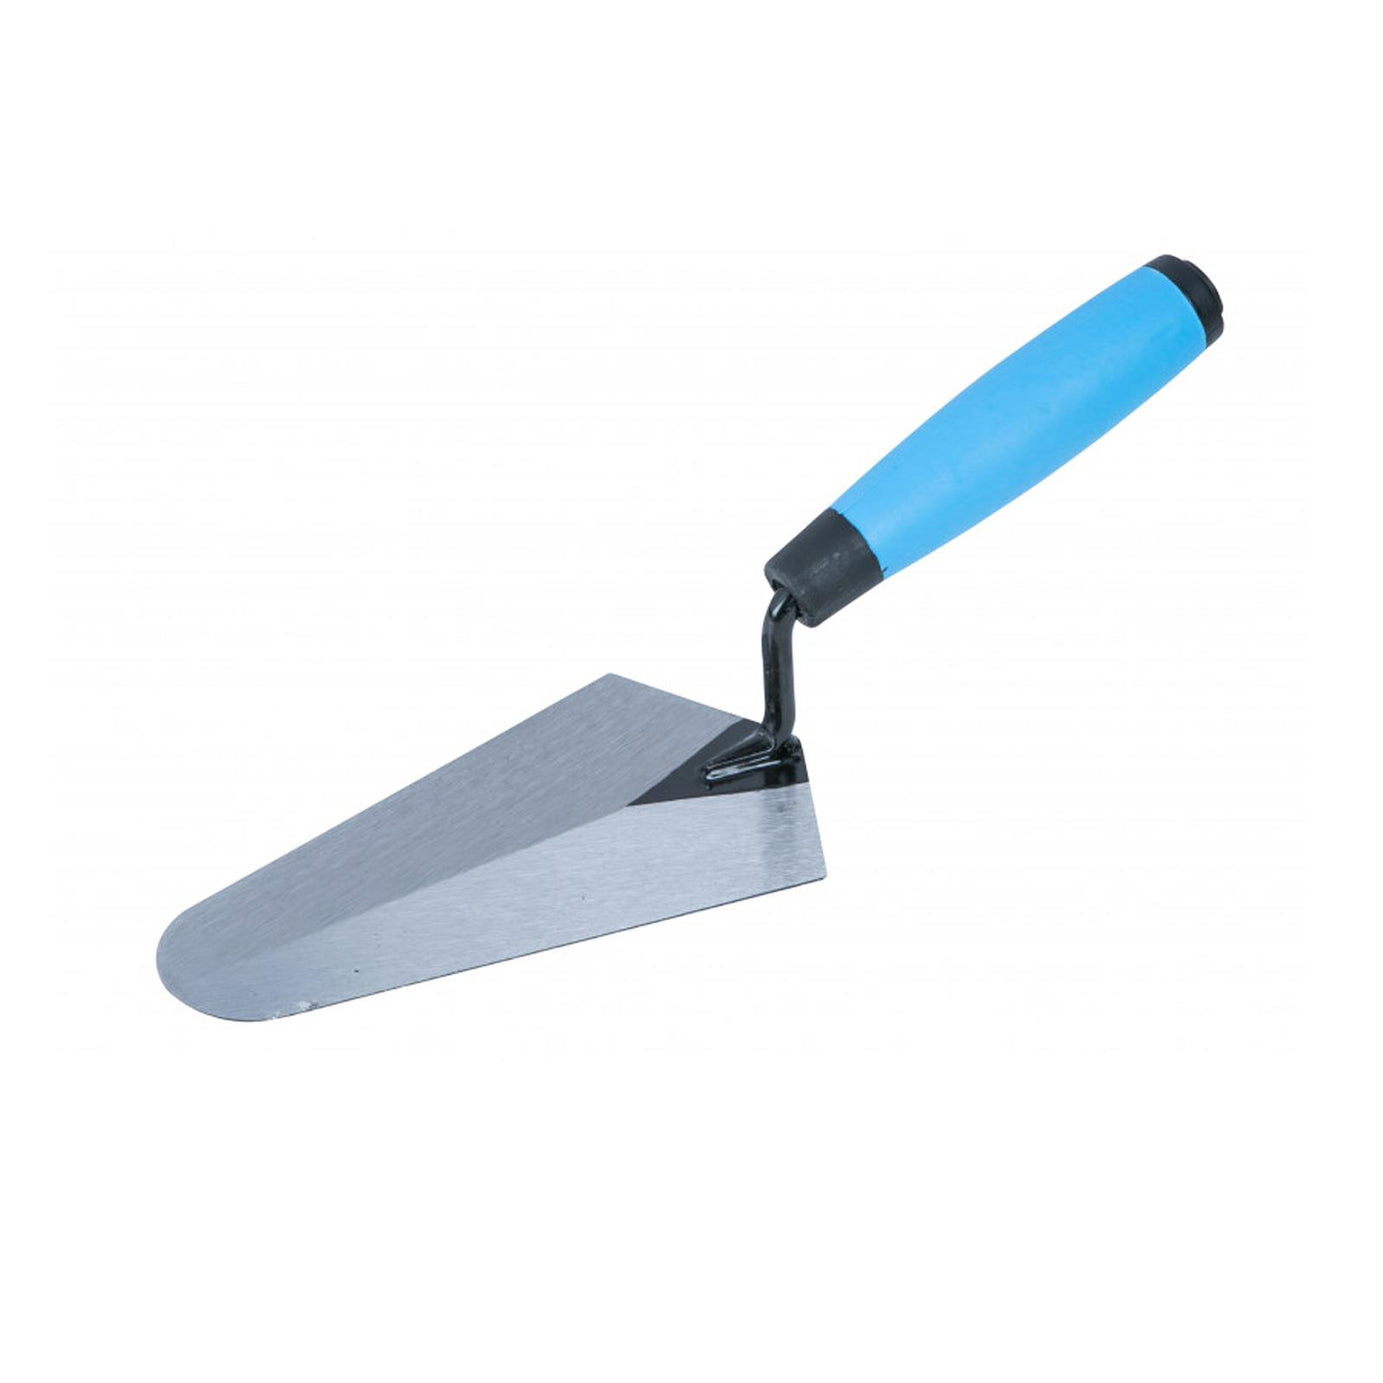 7" Brick Laying Cement Gauging Trowel with Soft Grip Handle Builders BlueSpot